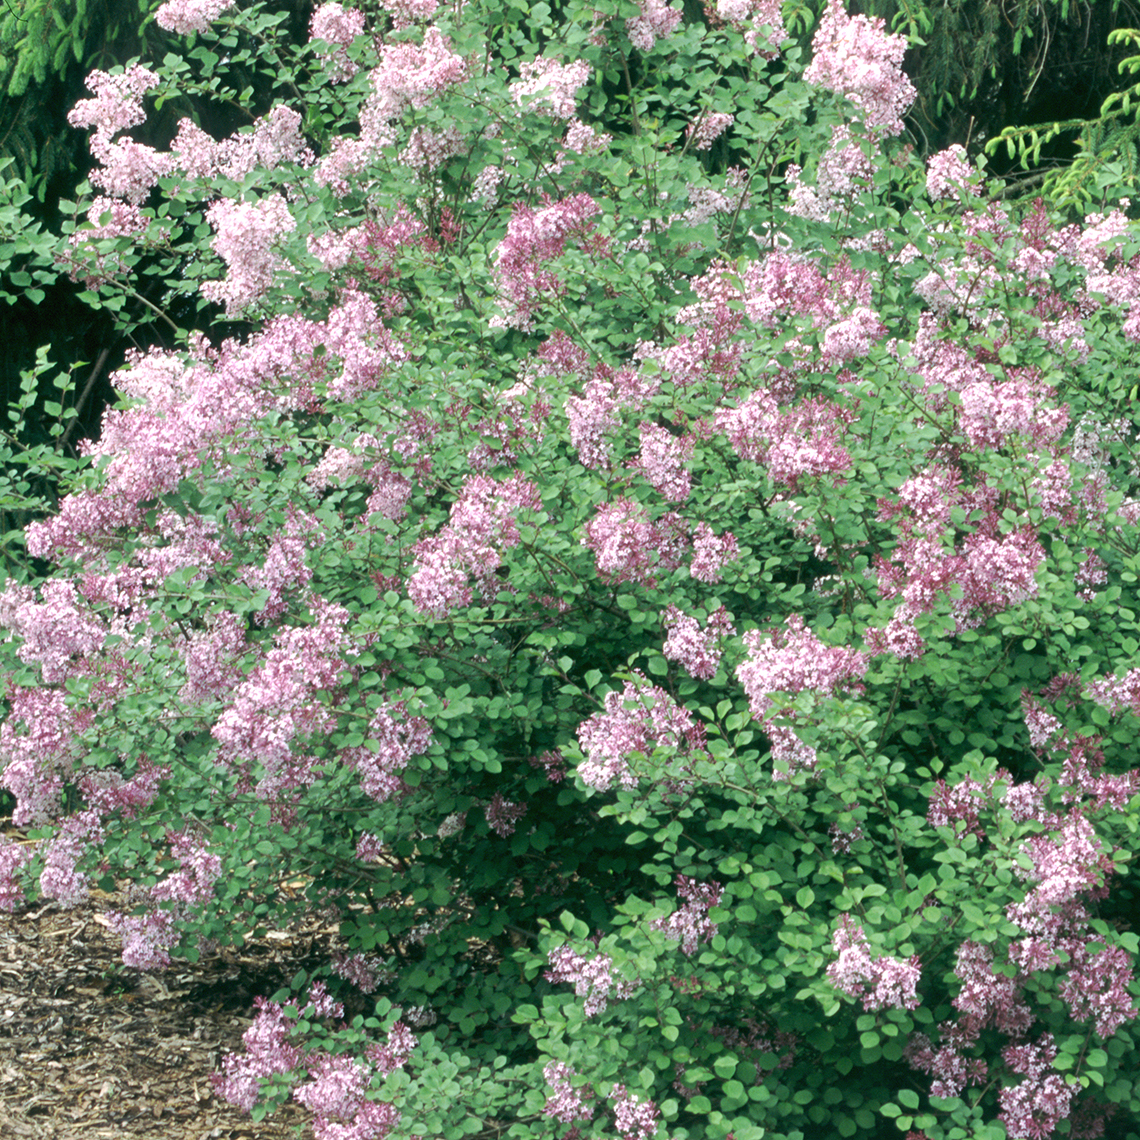 Red Pixie lilac shrub in bloom